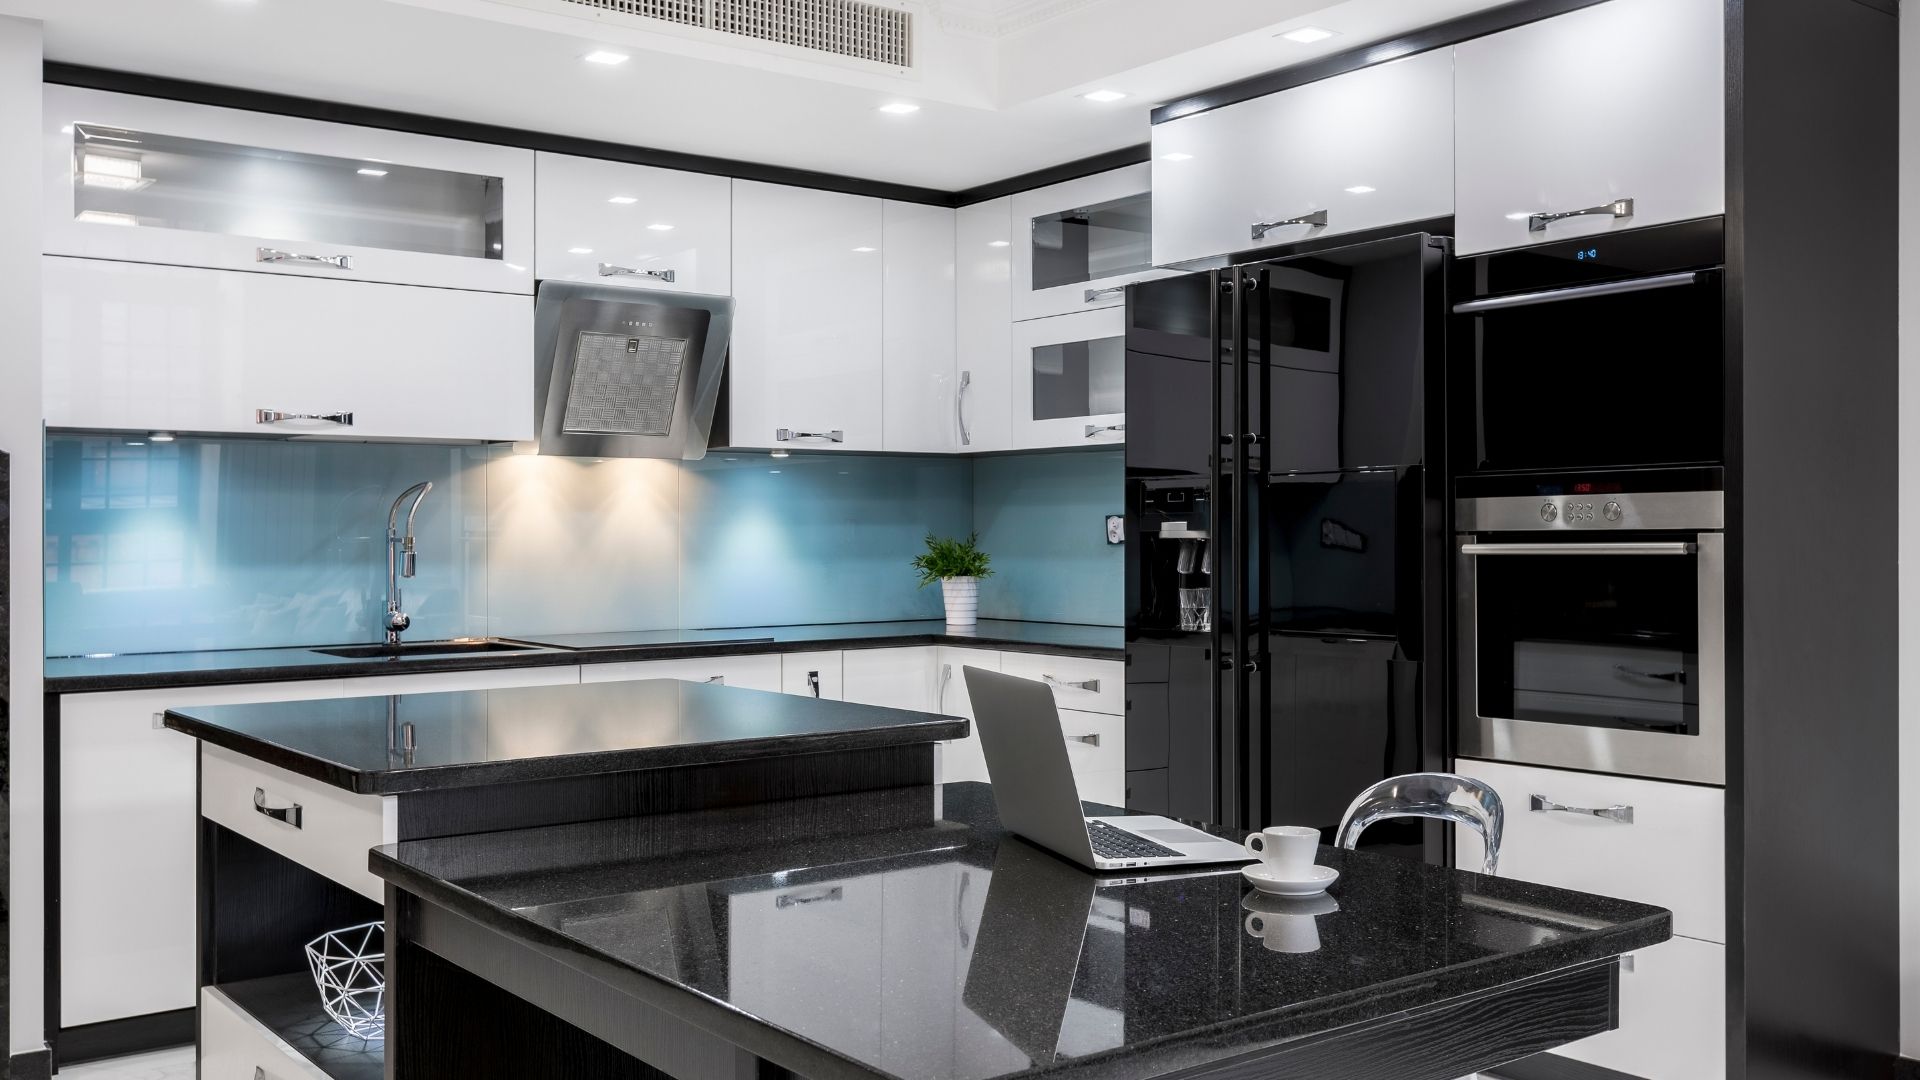 Modern Black Appliances for Your Home